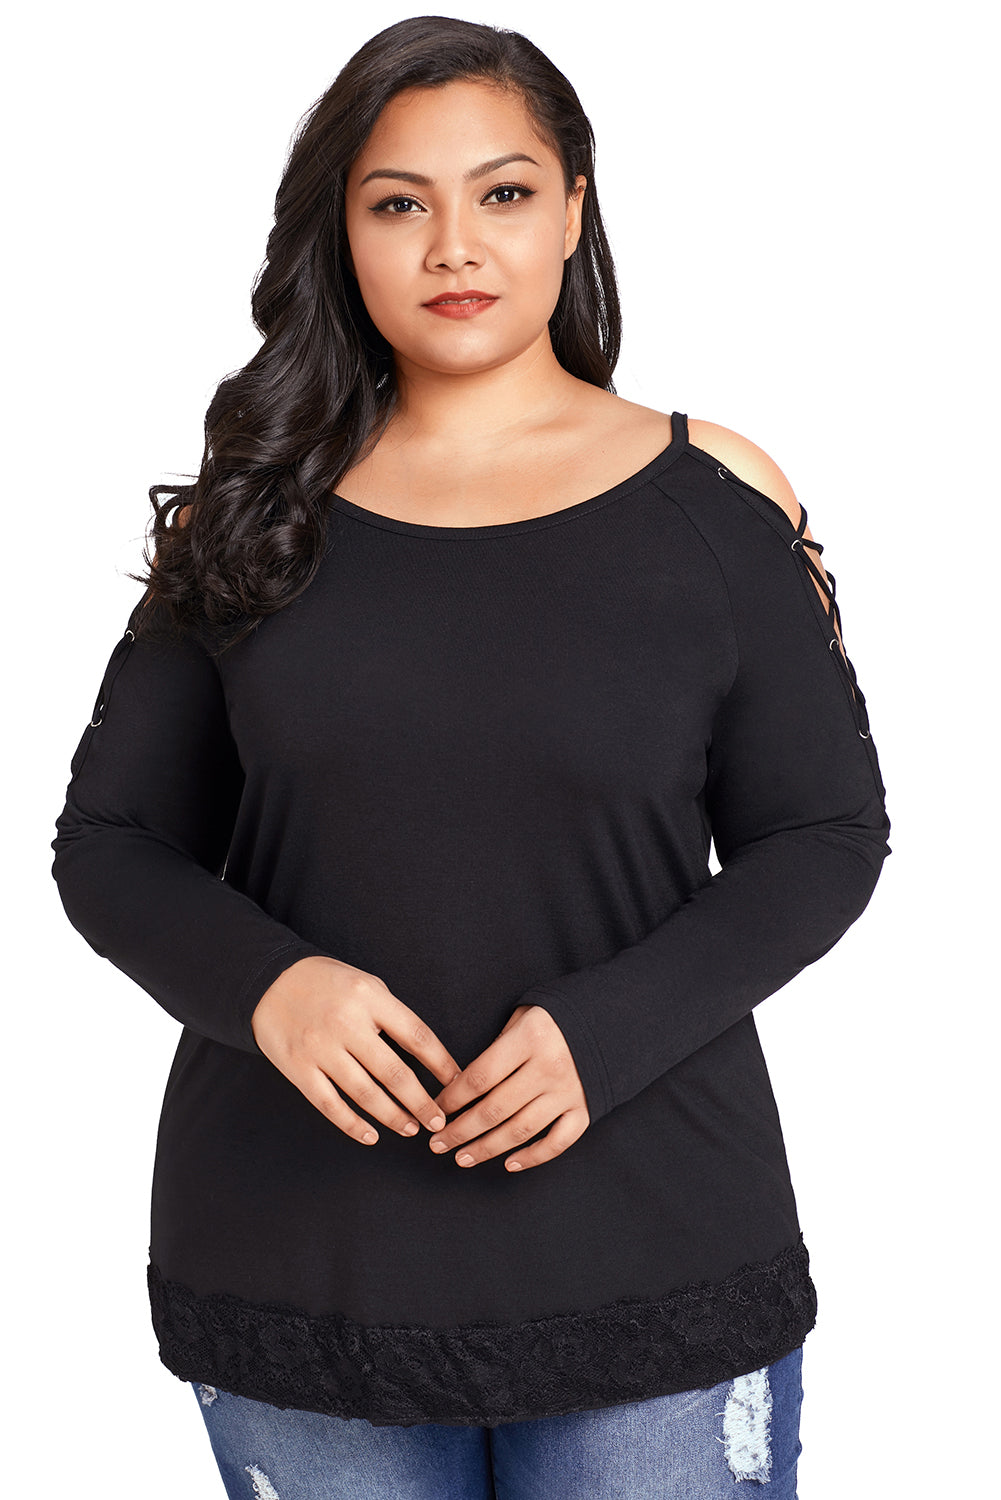 Black Lace up Sleeves Plus Size Top